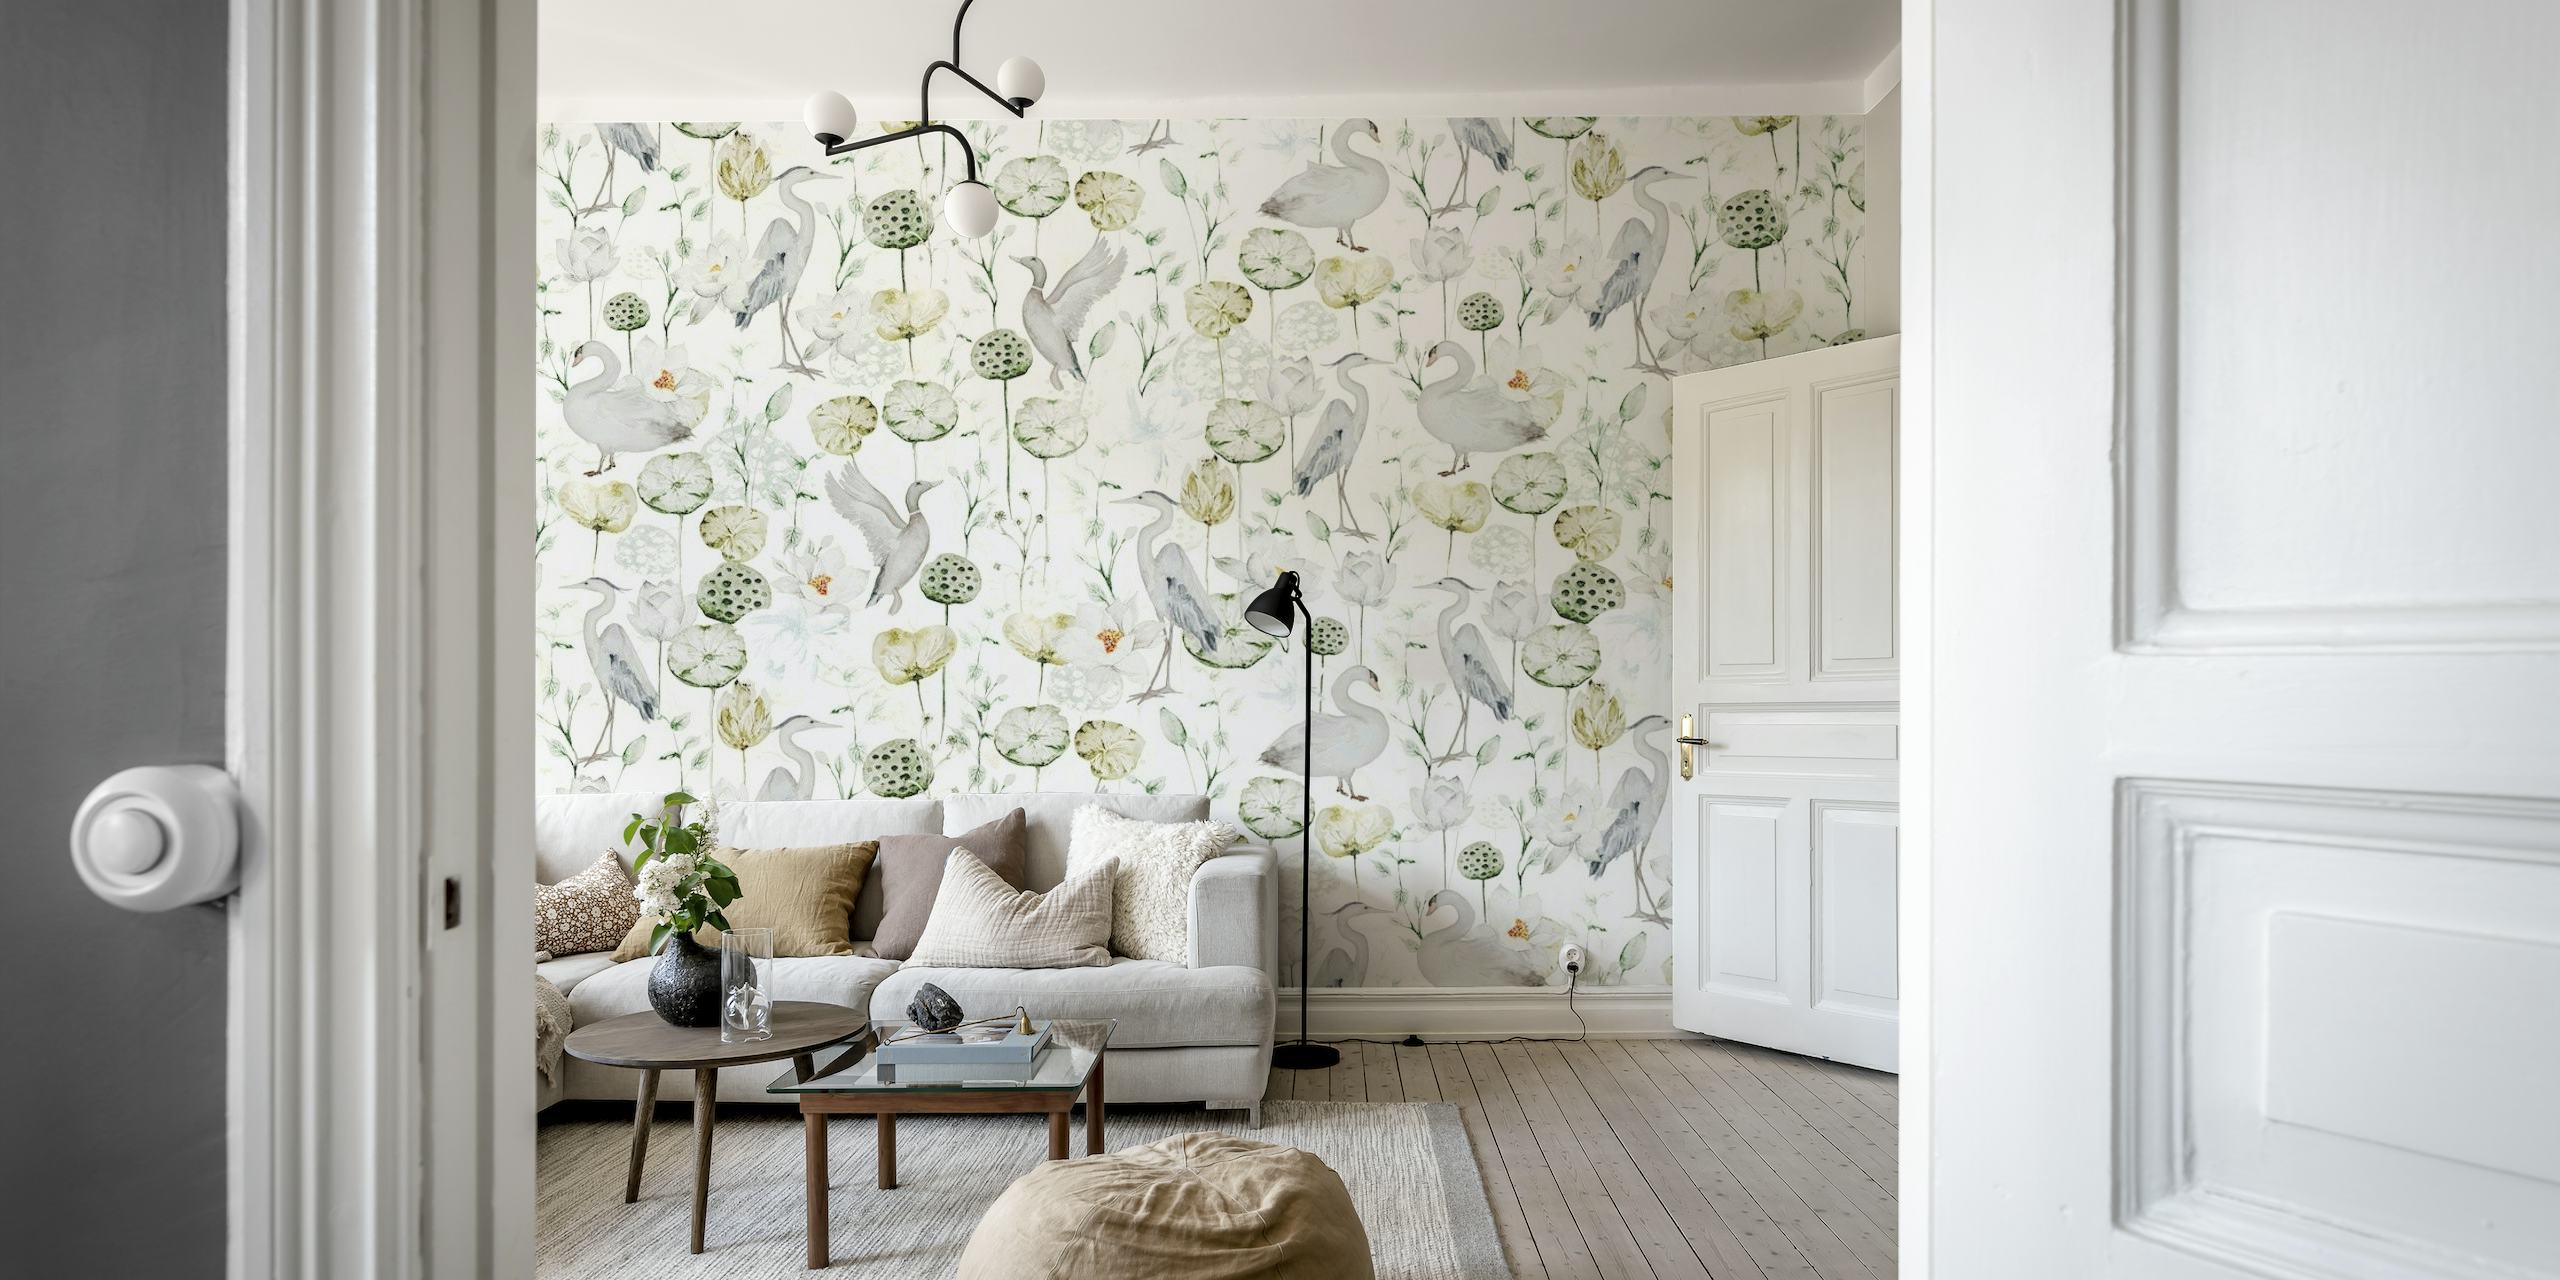 Elegant cranes and blooming lotus flowers wall mural in a serene garden setting